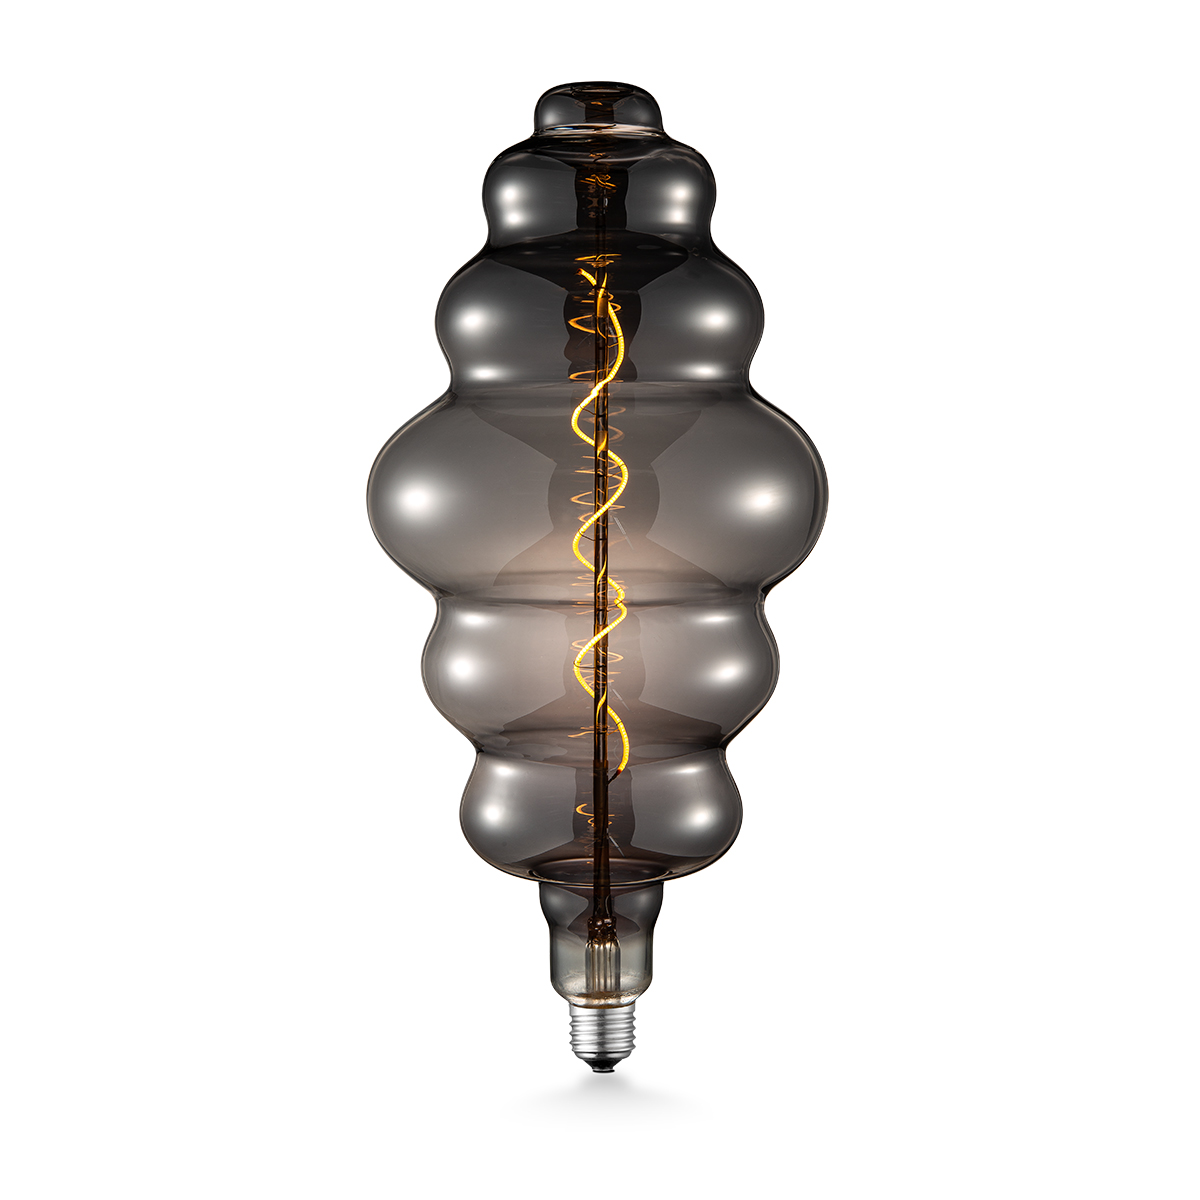 Tangla lighting - TLB-8049-06TM - LED Light Bulb Double Spiral filament - special 4W titanium - swing - dimmable - E27